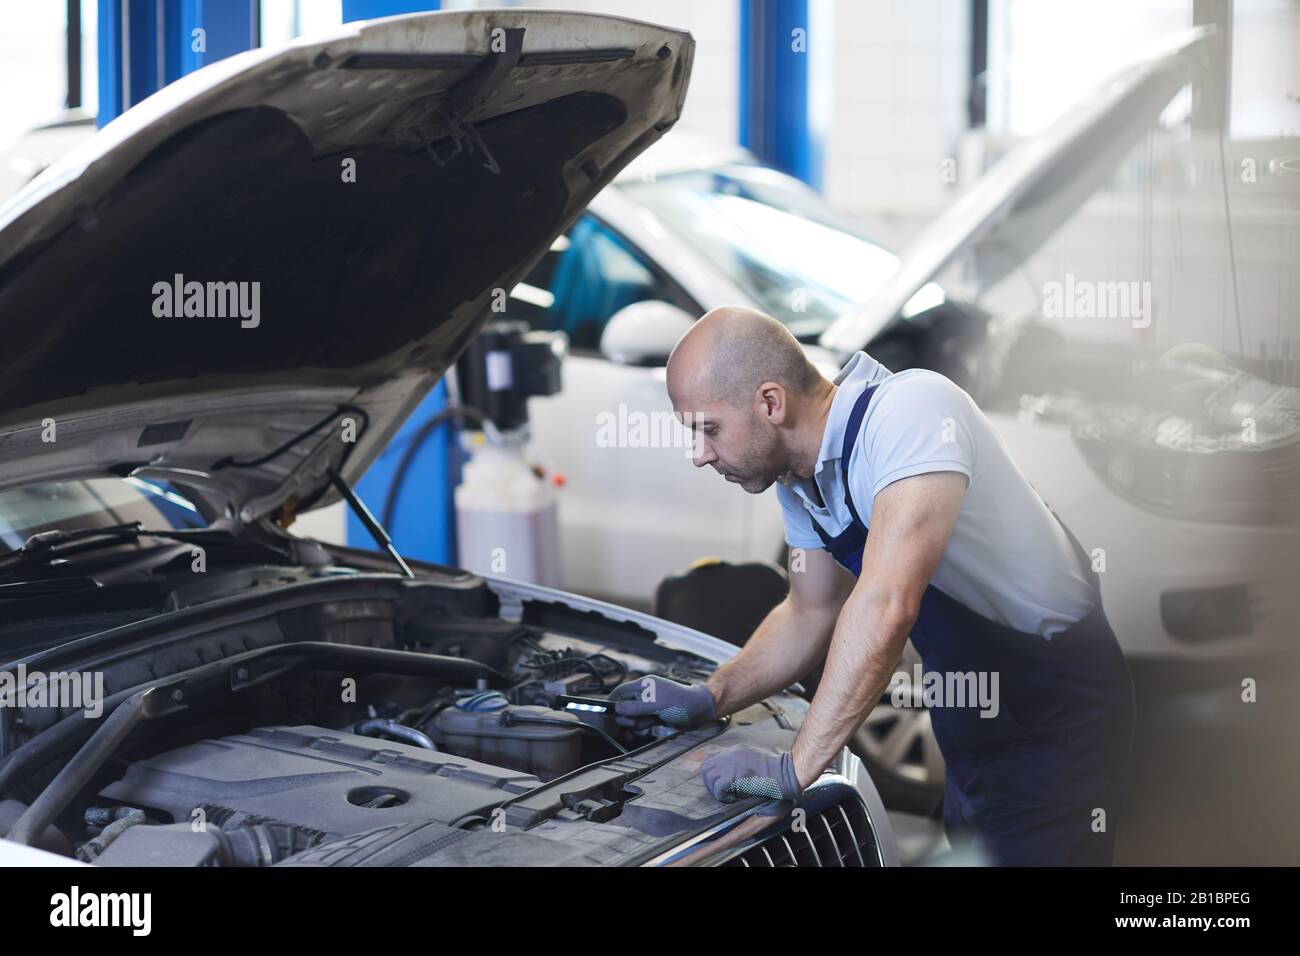 Portrait of muscular car mechanic looking into open hood of vehicle during inspection in garage shop, copy space Stock Photo